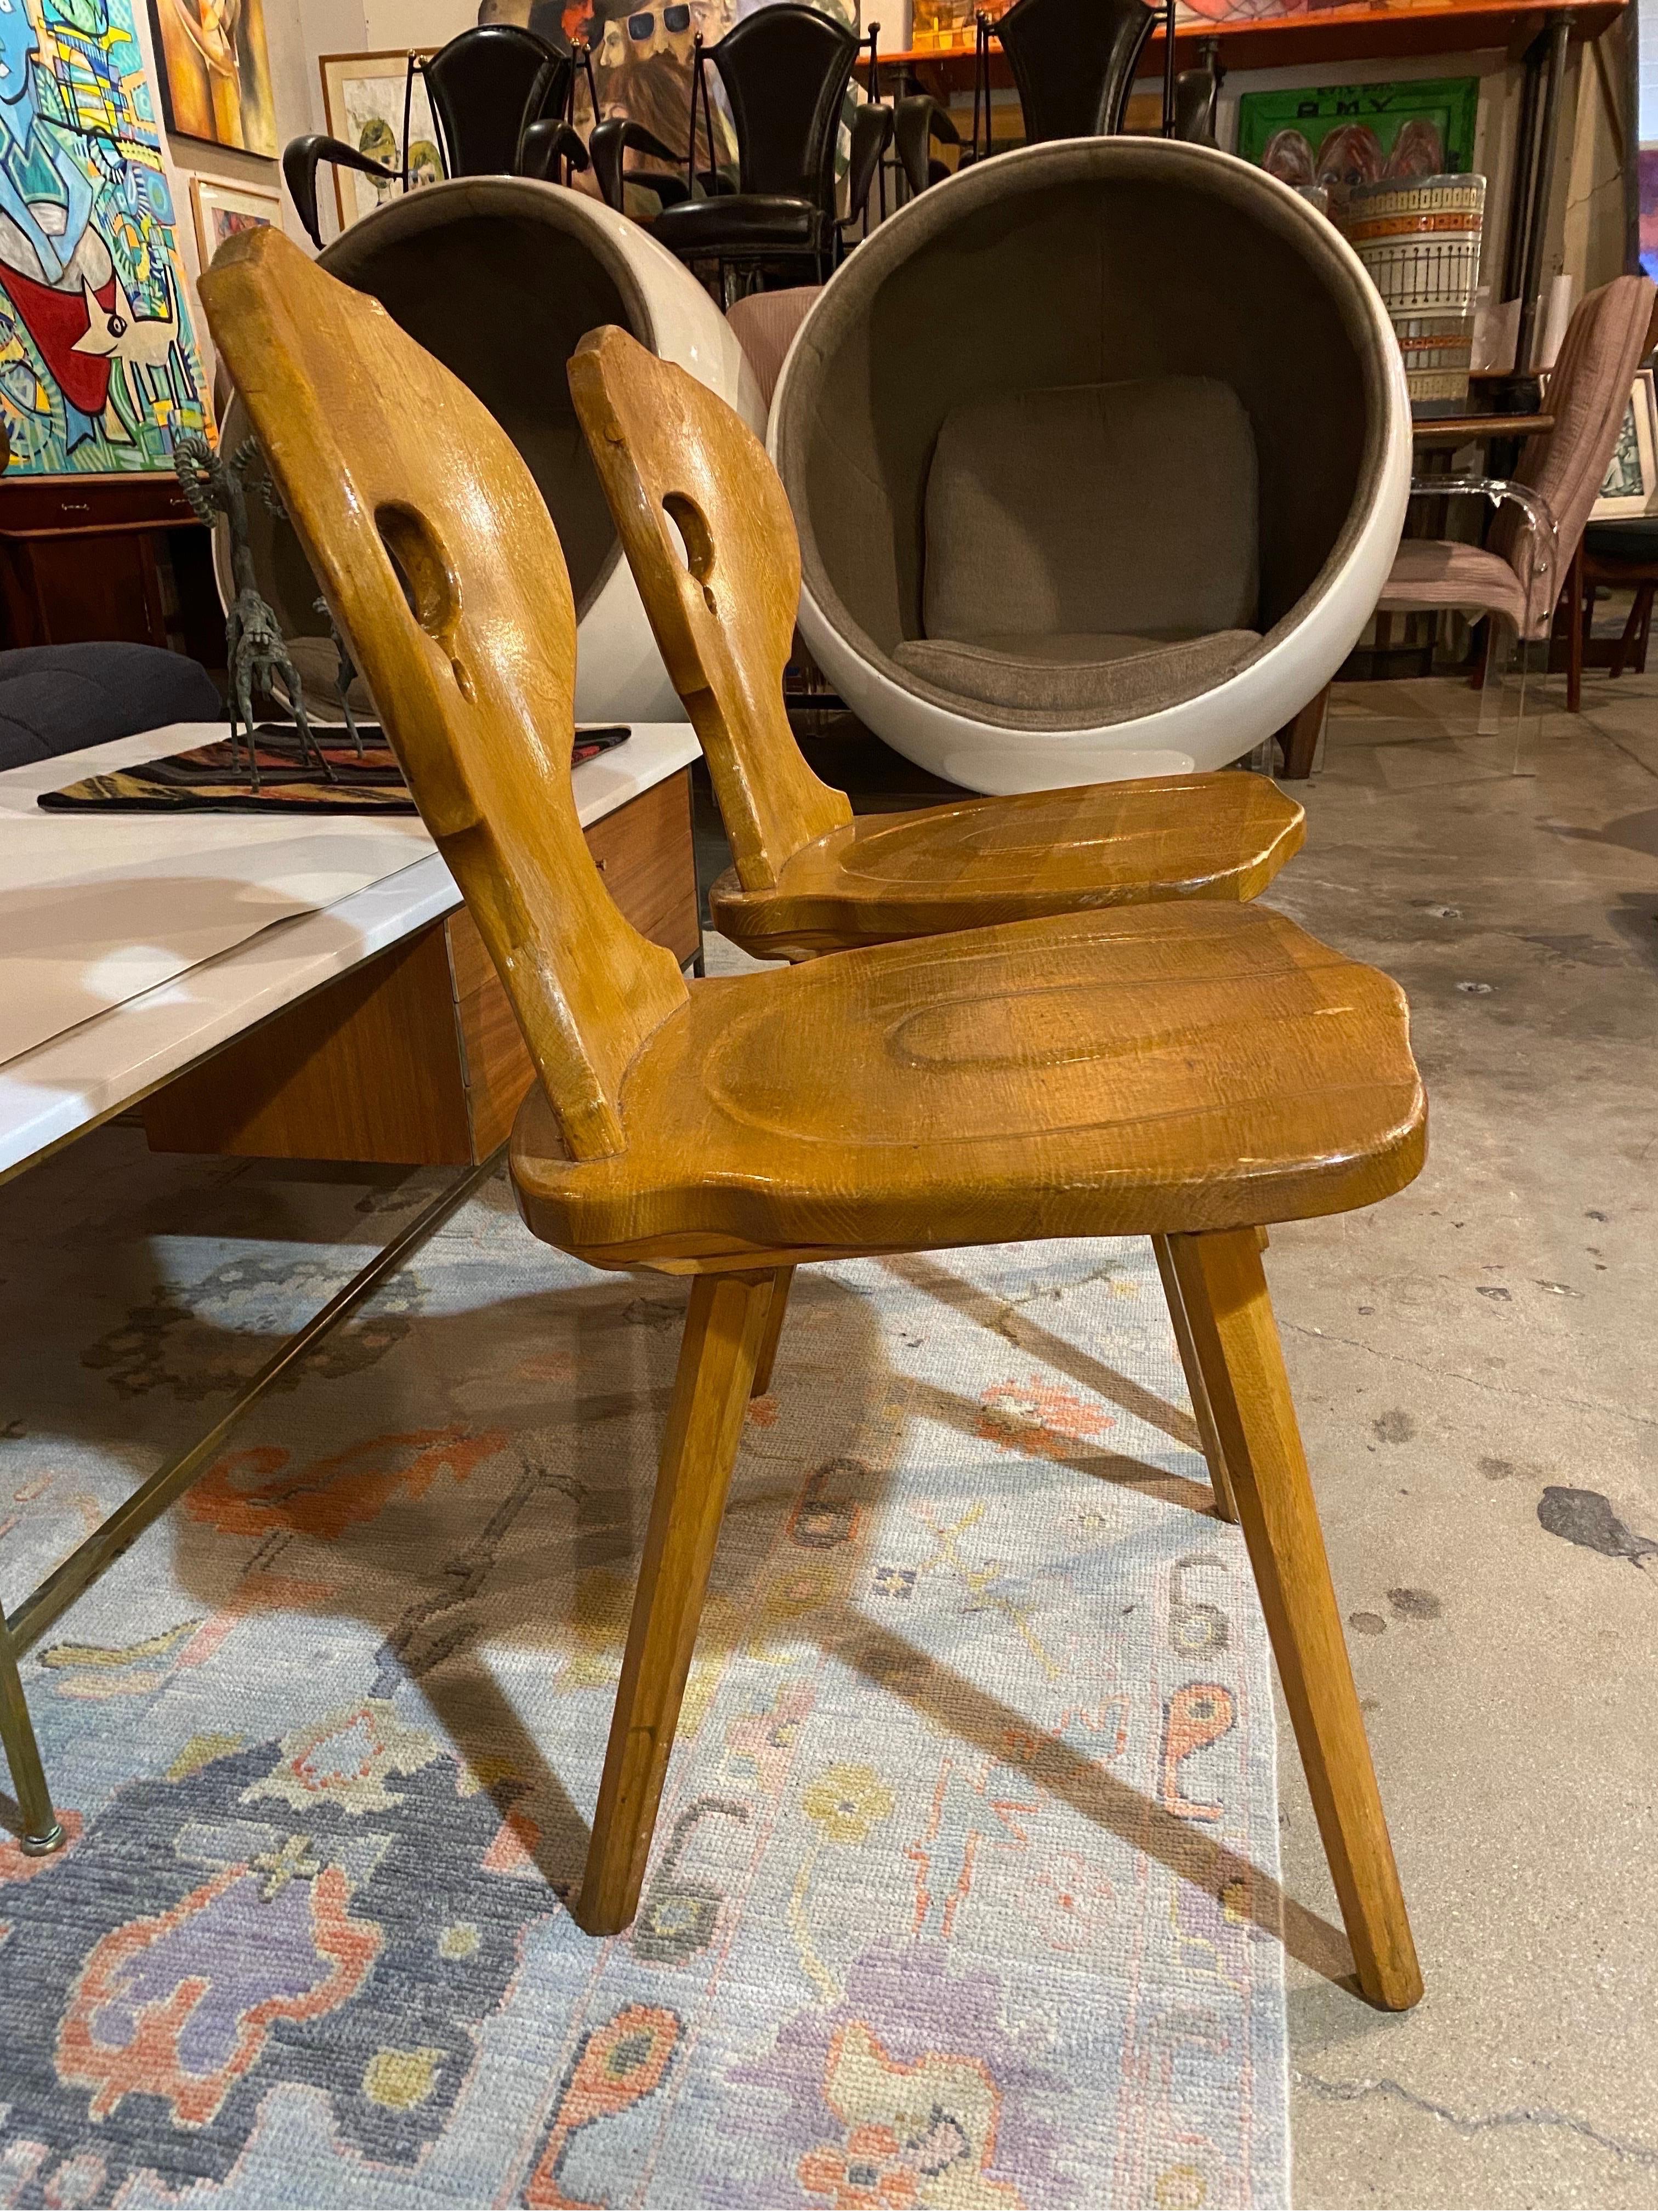 Pair of Mid-Century Modern blonde oak Brutalist chairs that feature a sculptural design and visible joints, Belgium, circa 1960s. Wear is age-appropriate and is in good overall condition.